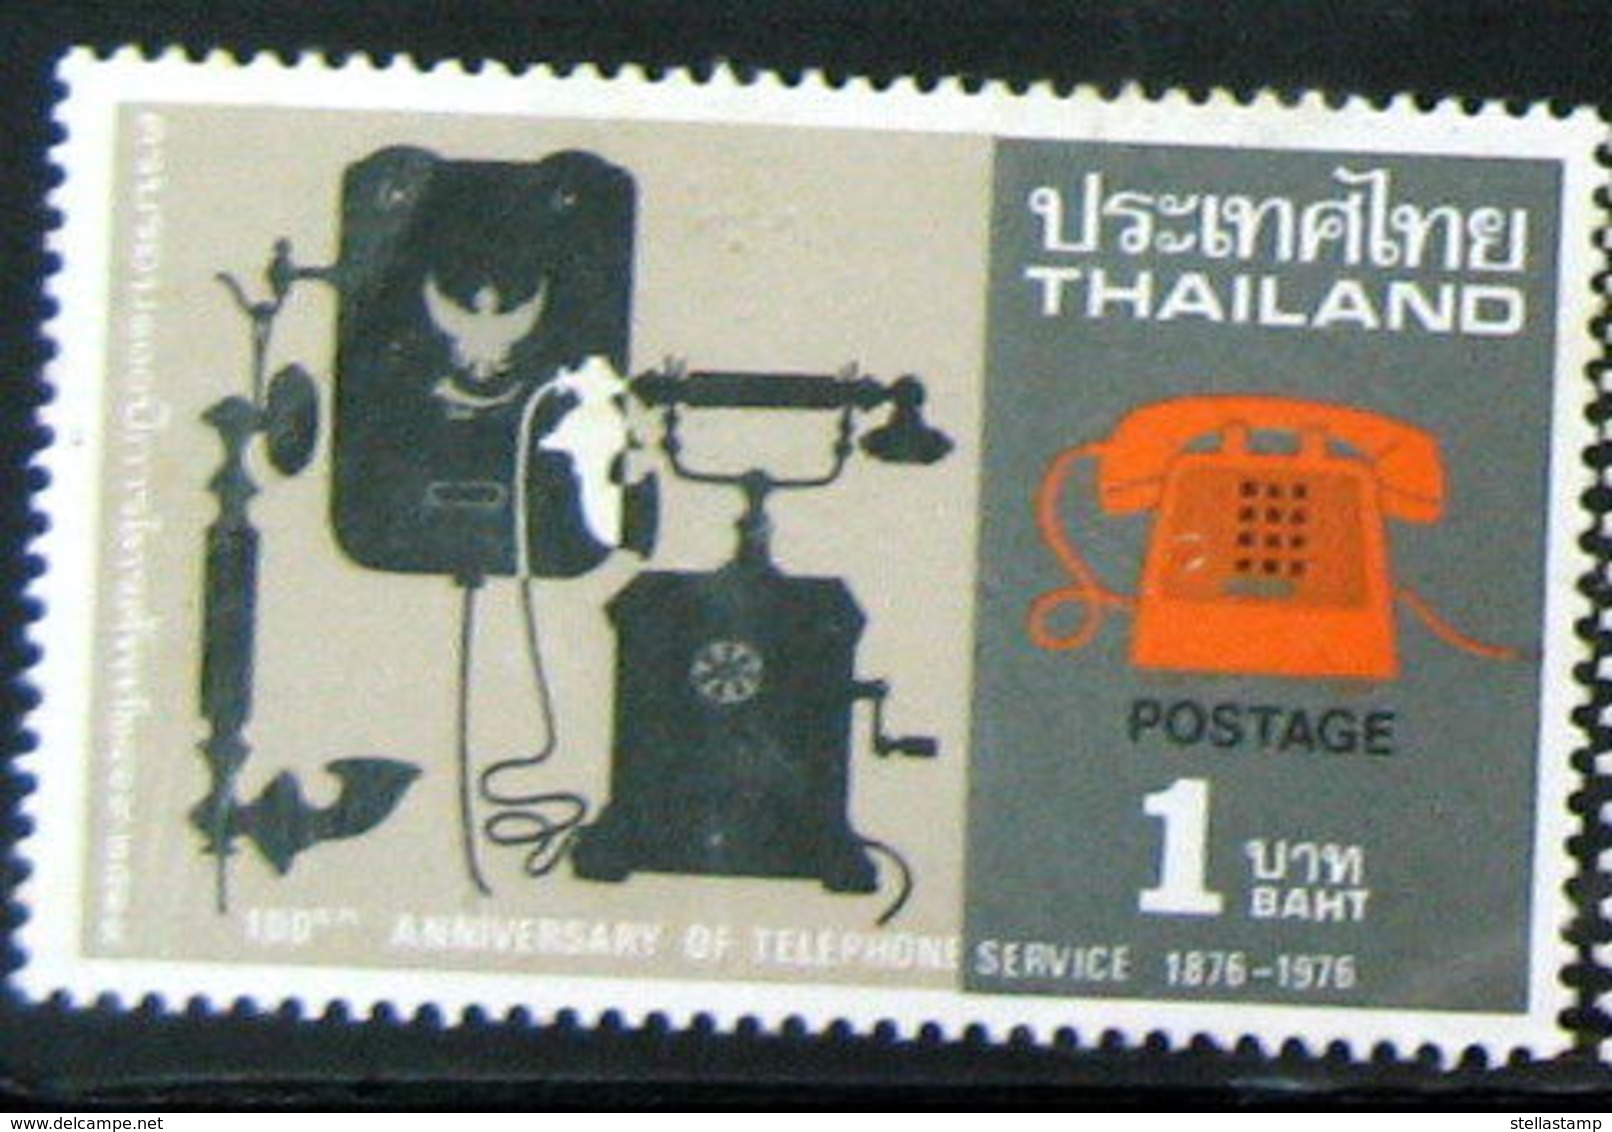 Thailand Stamp 1976 100th Ann Of The Telephone Service - Thailand